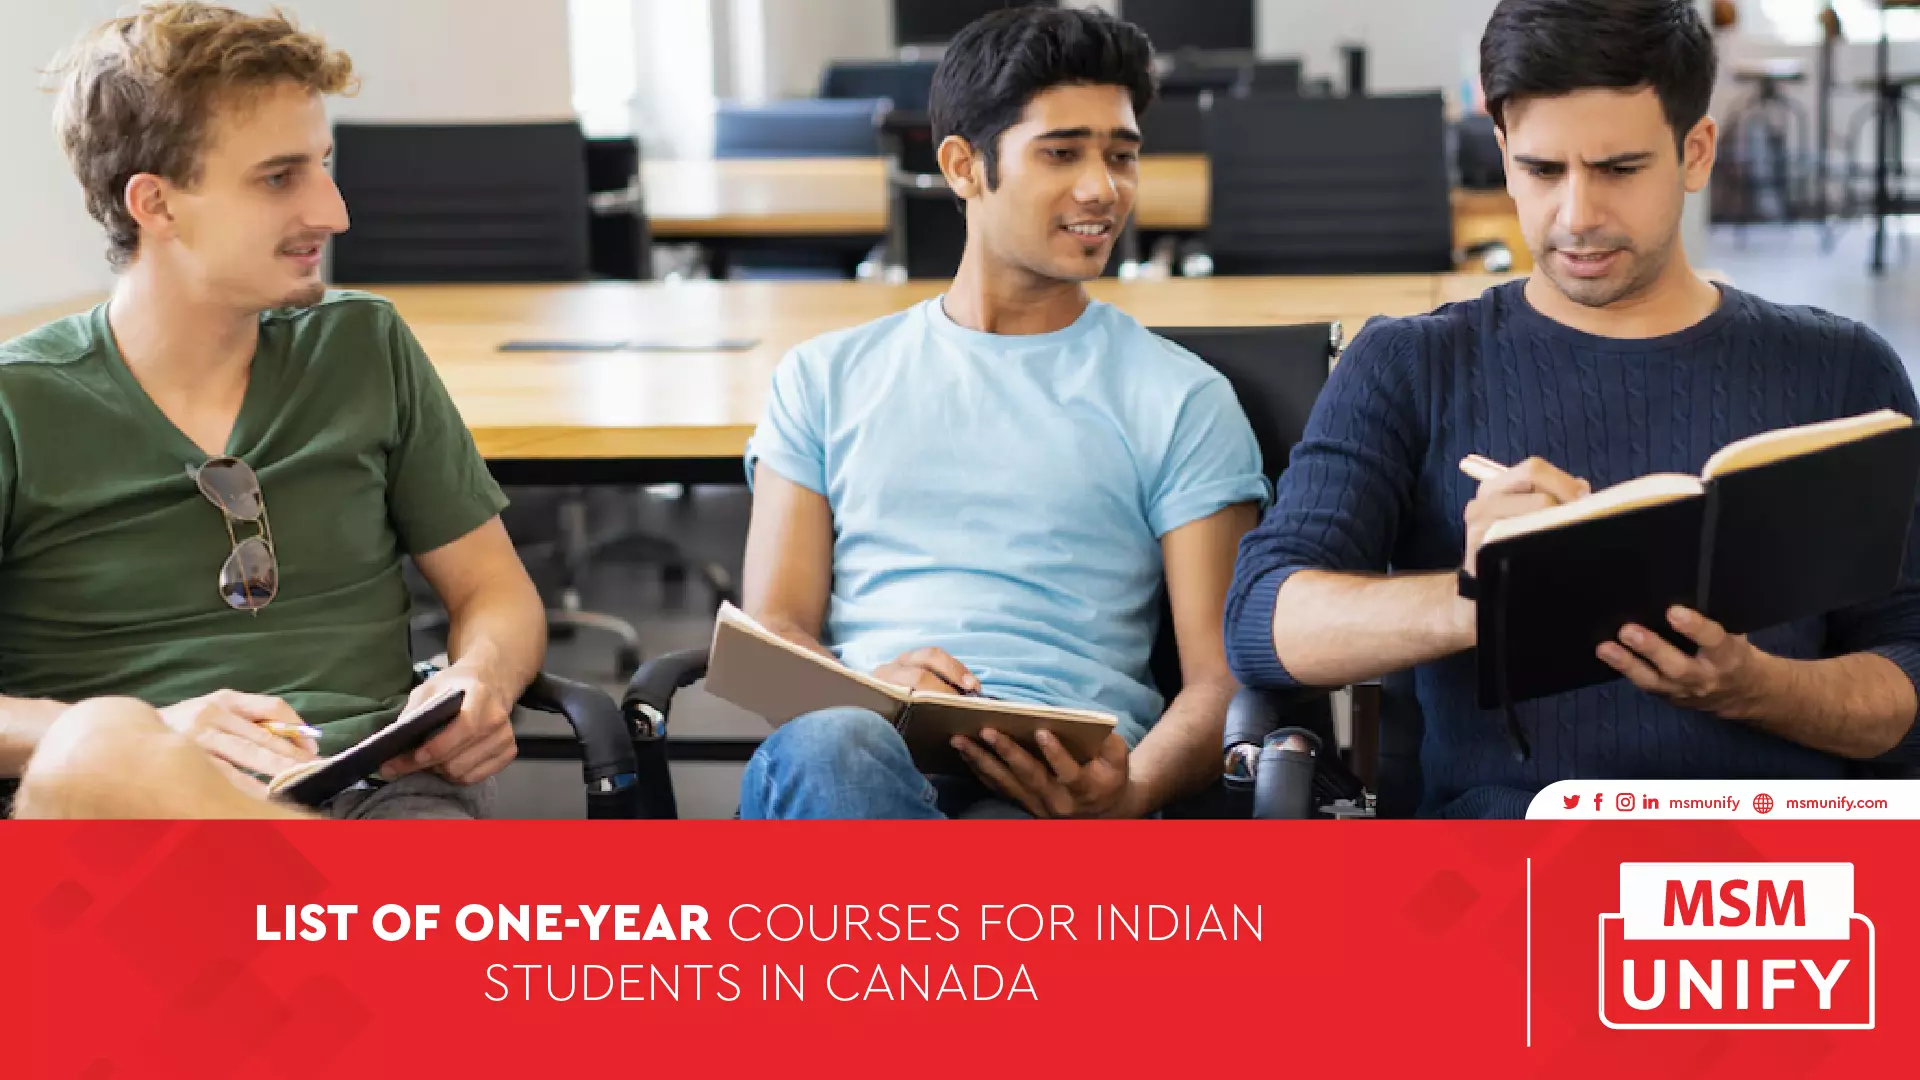 121622 MSM Unify List of One Year Courses for Indian Students in Canada 01